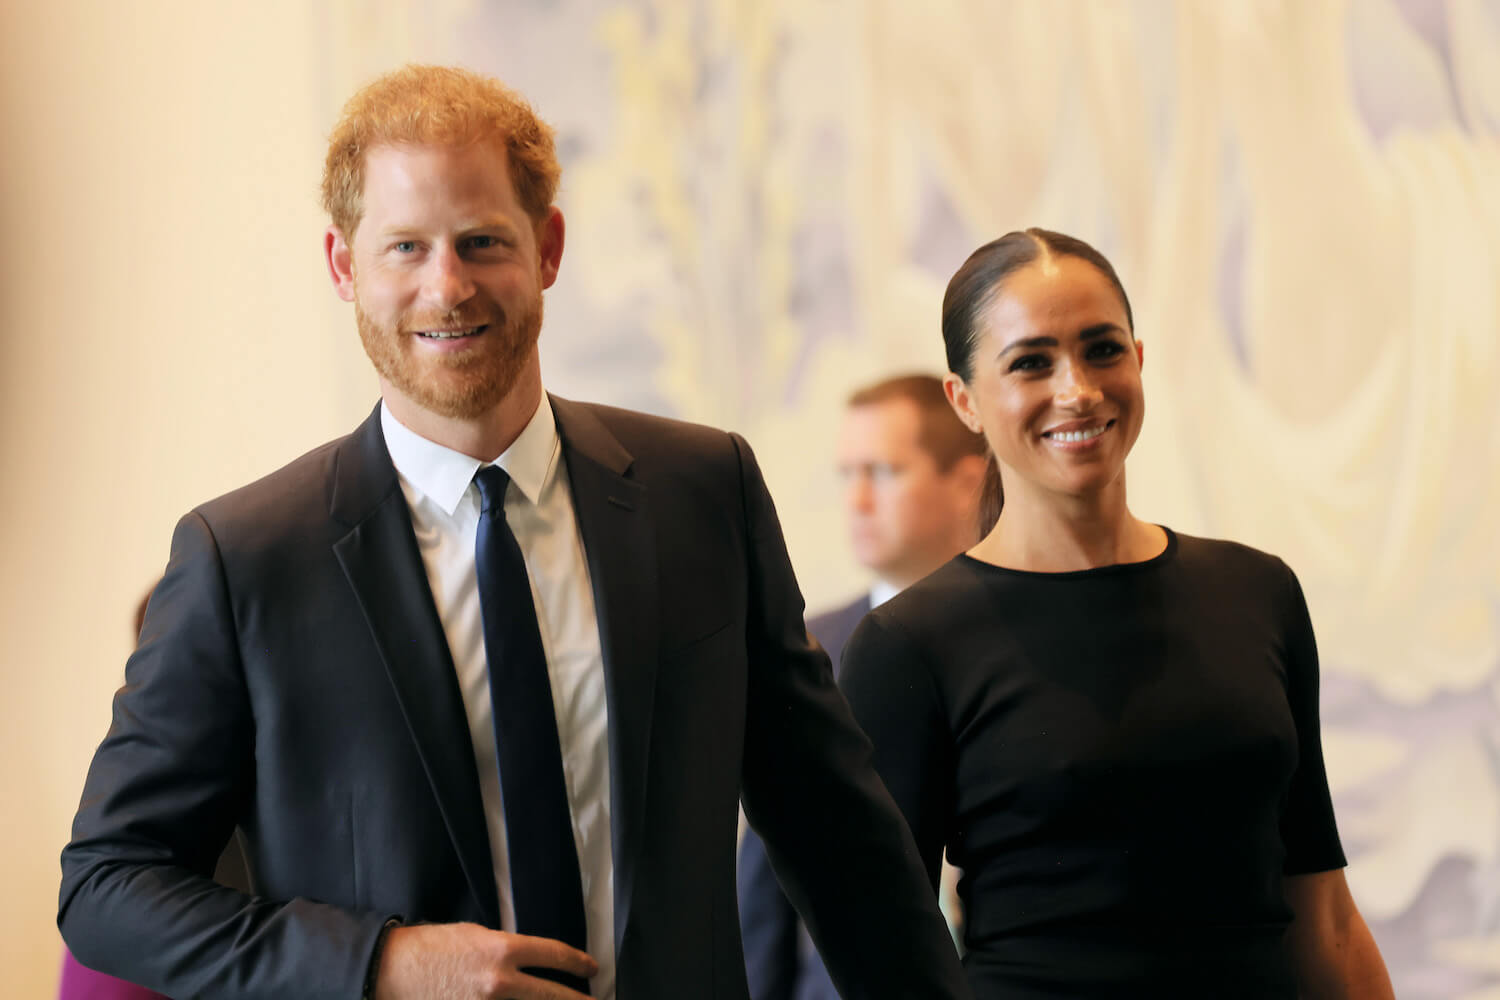 Prince Harry and Meghan Markle smile while holding hands